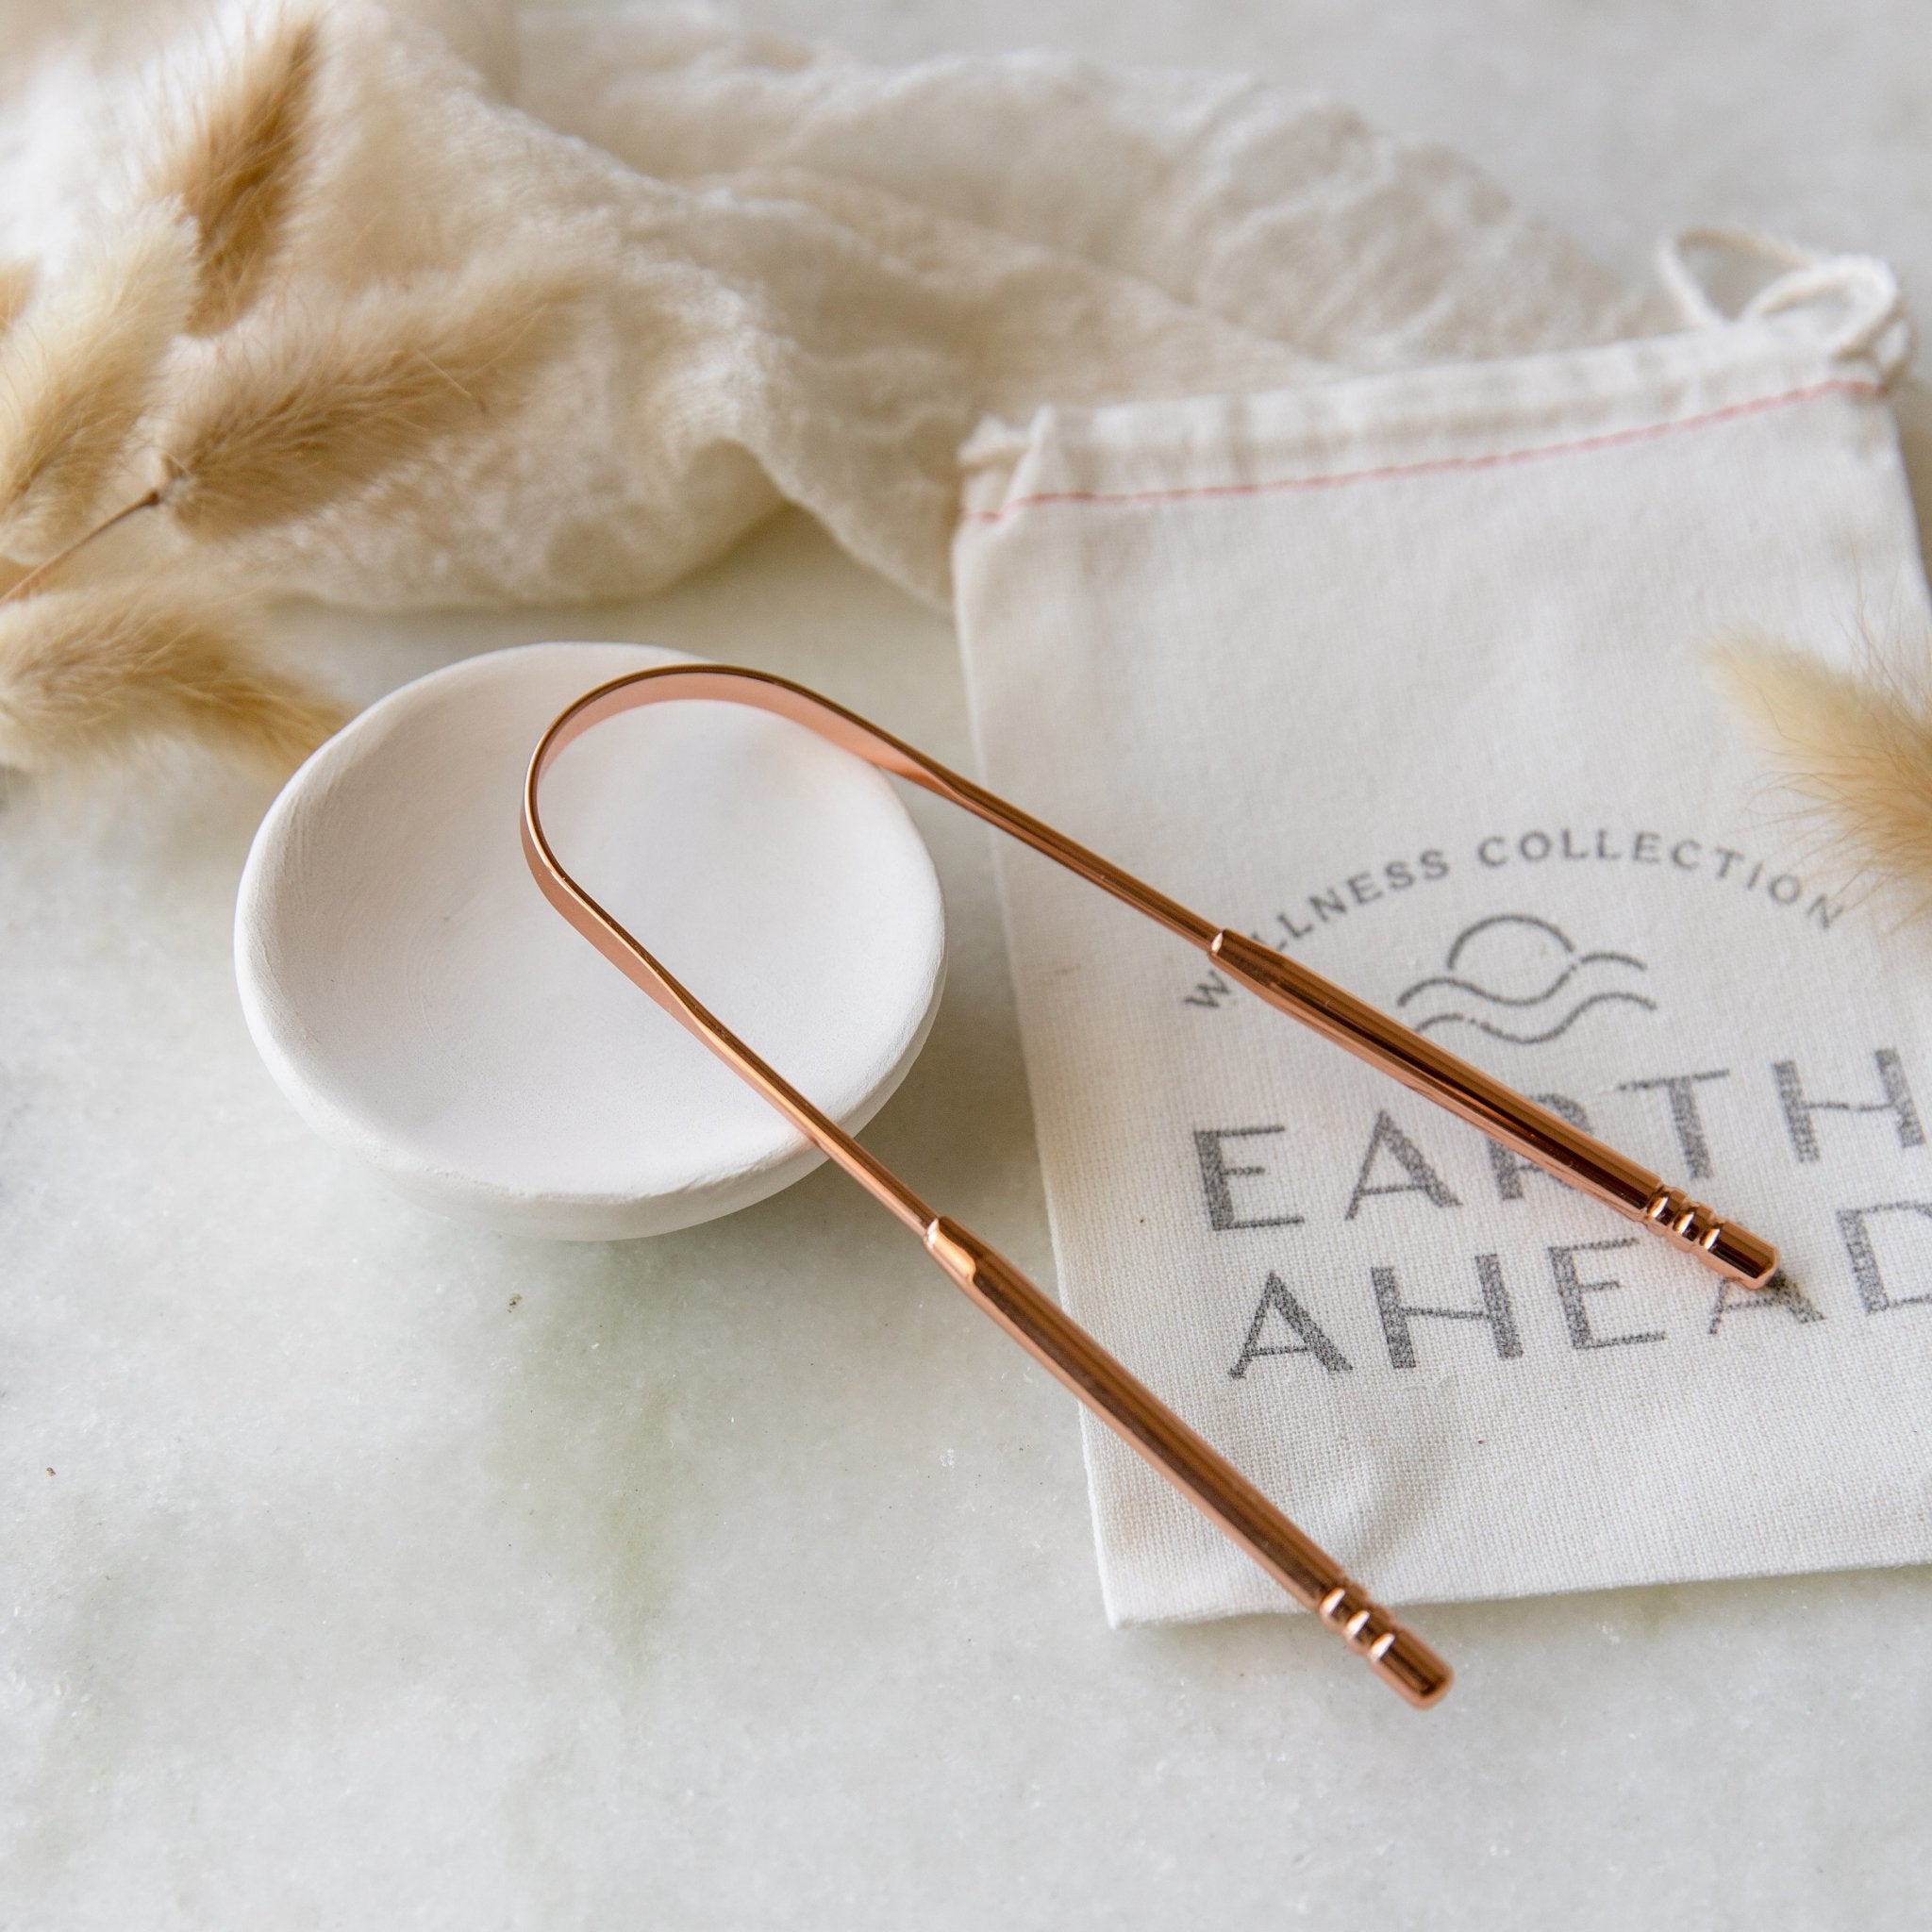 Ayurvedic Rose Gold Stainless Steel Tongue Scraper with Cotton Pouch - Earth Ahead